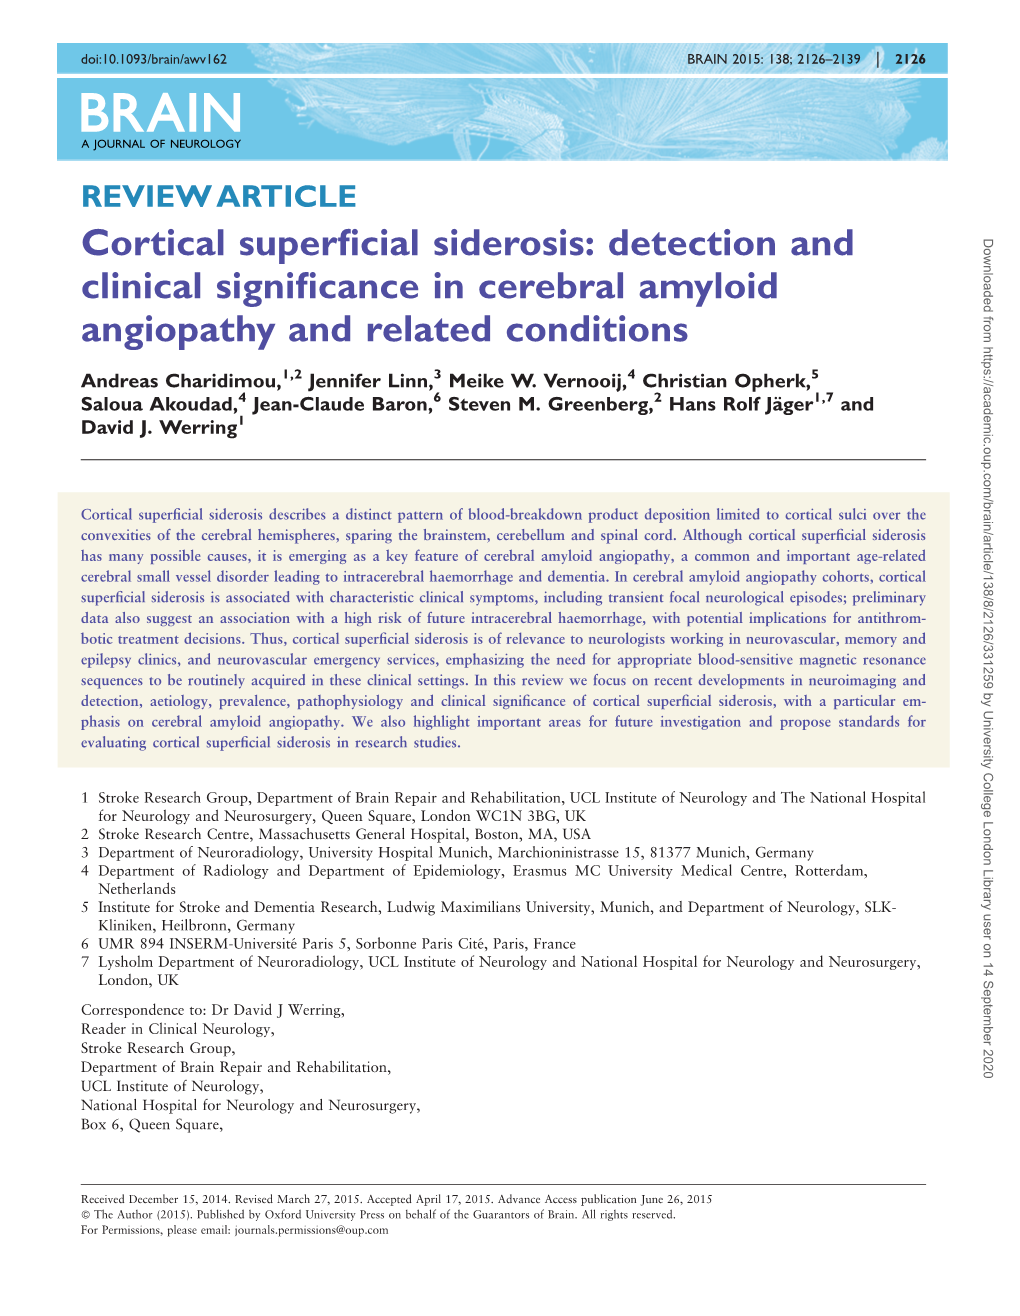 Cortical Superficial Siderosis: Detection and Clinical Significance In